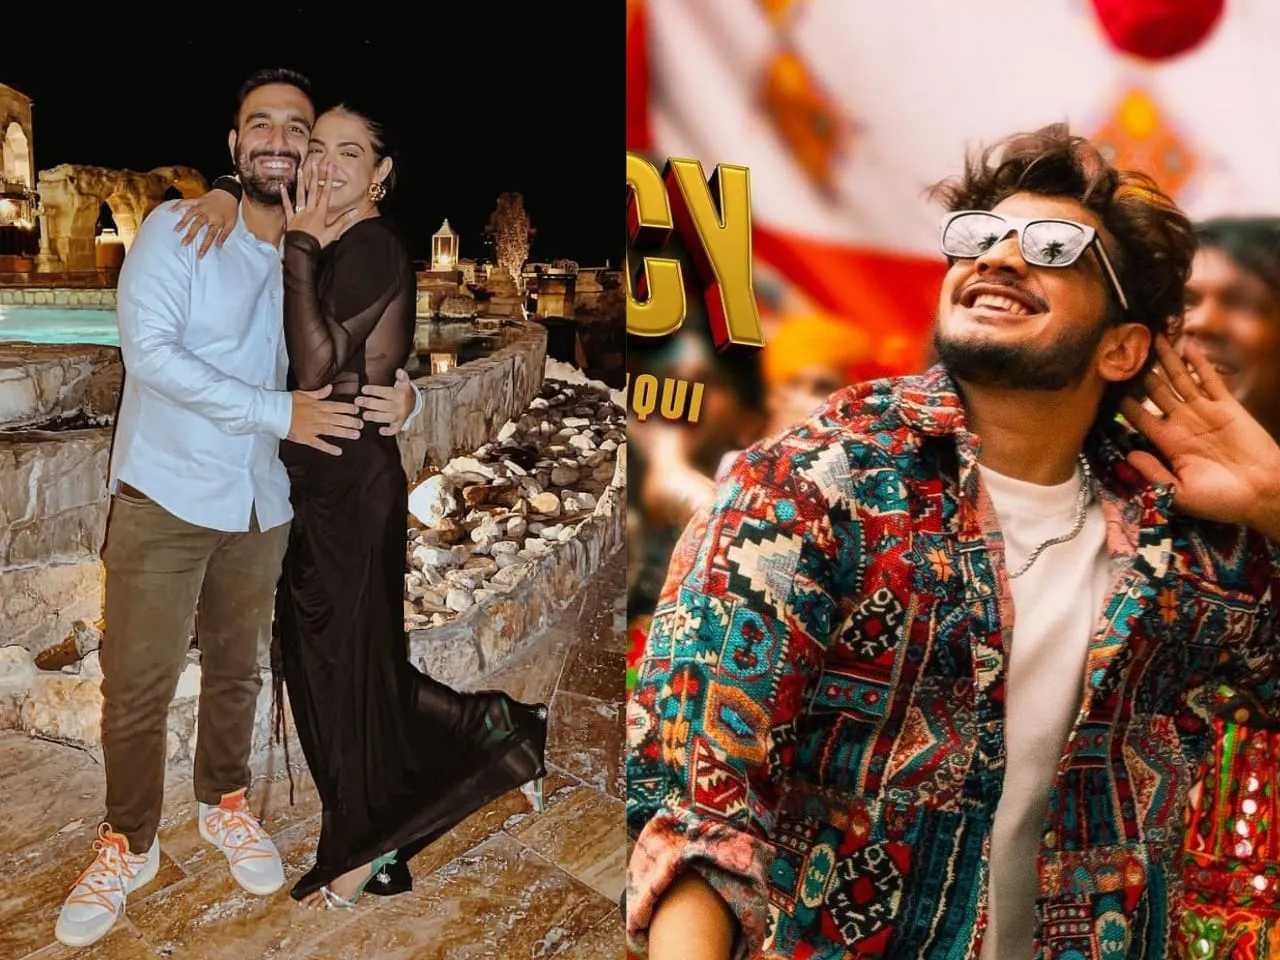 From Nishtha Gandhi's engagement to Munwar Faruqui's latest hit, this weekly roundup is a feast